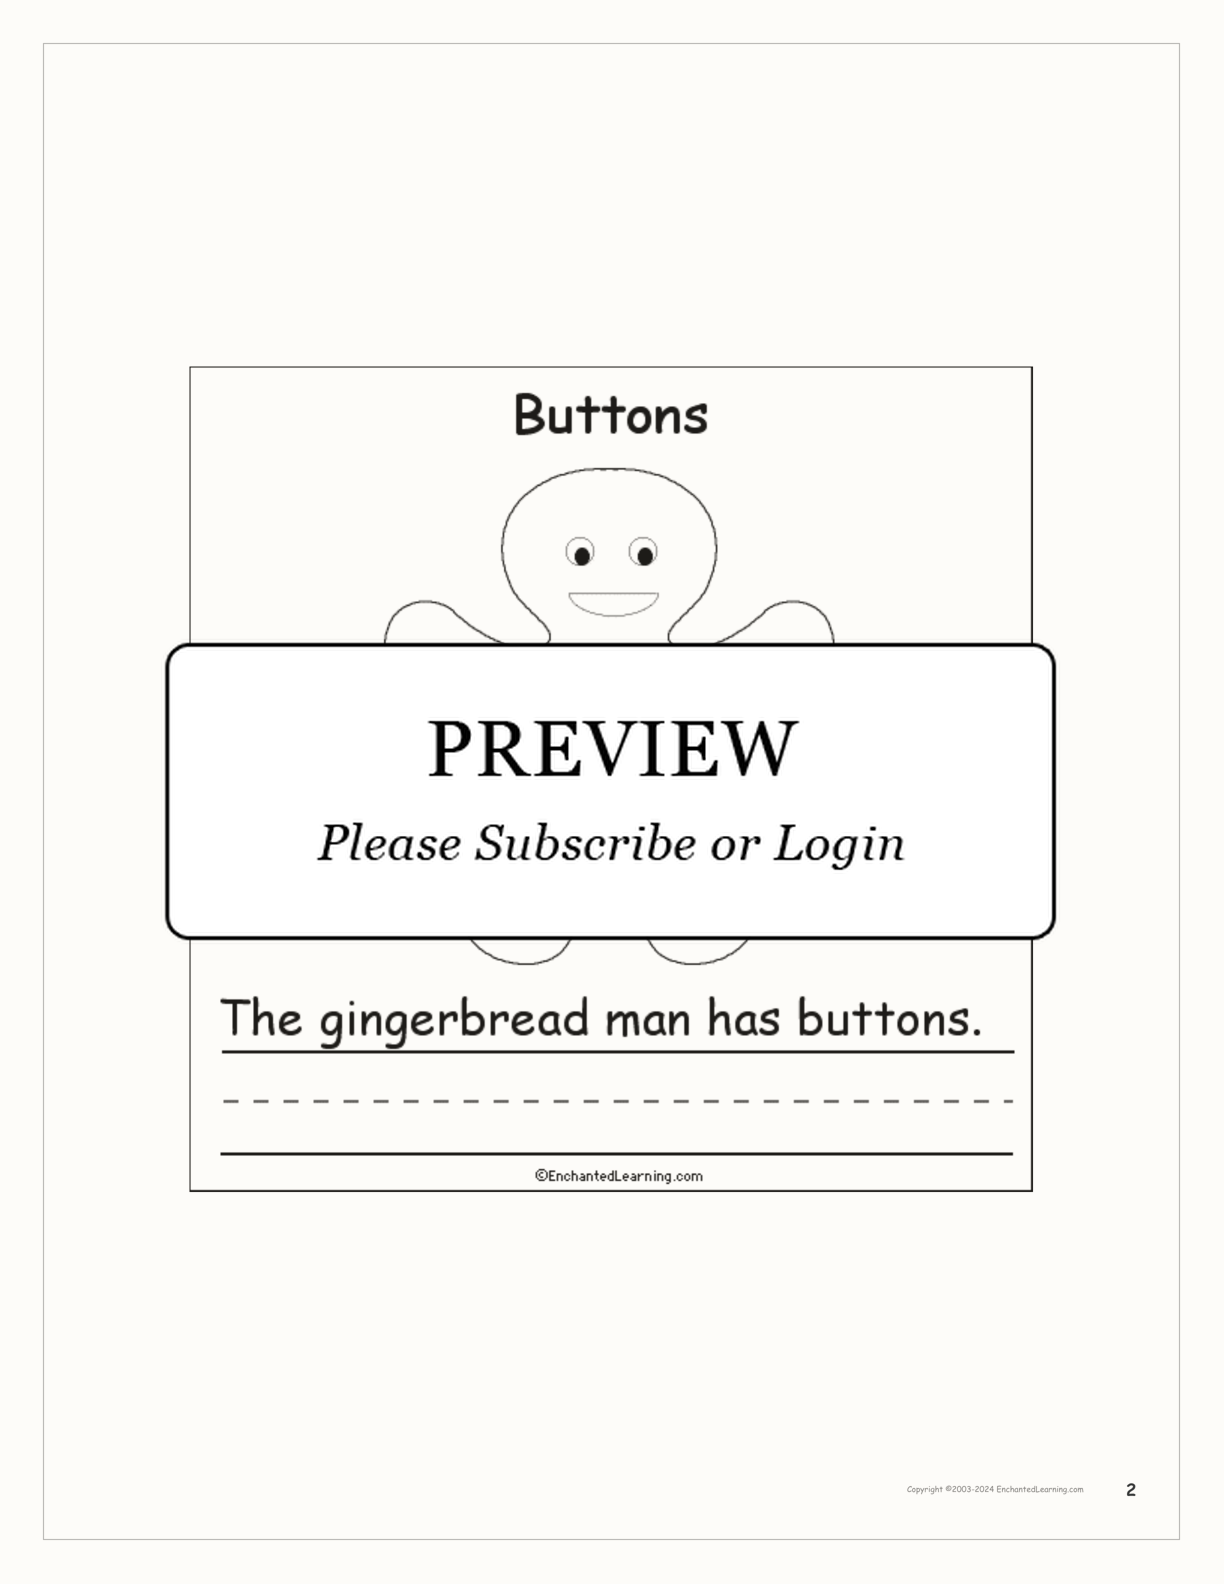 The Gingerbread Man's Clothes: Early Reader Book interactive worksheet page 2